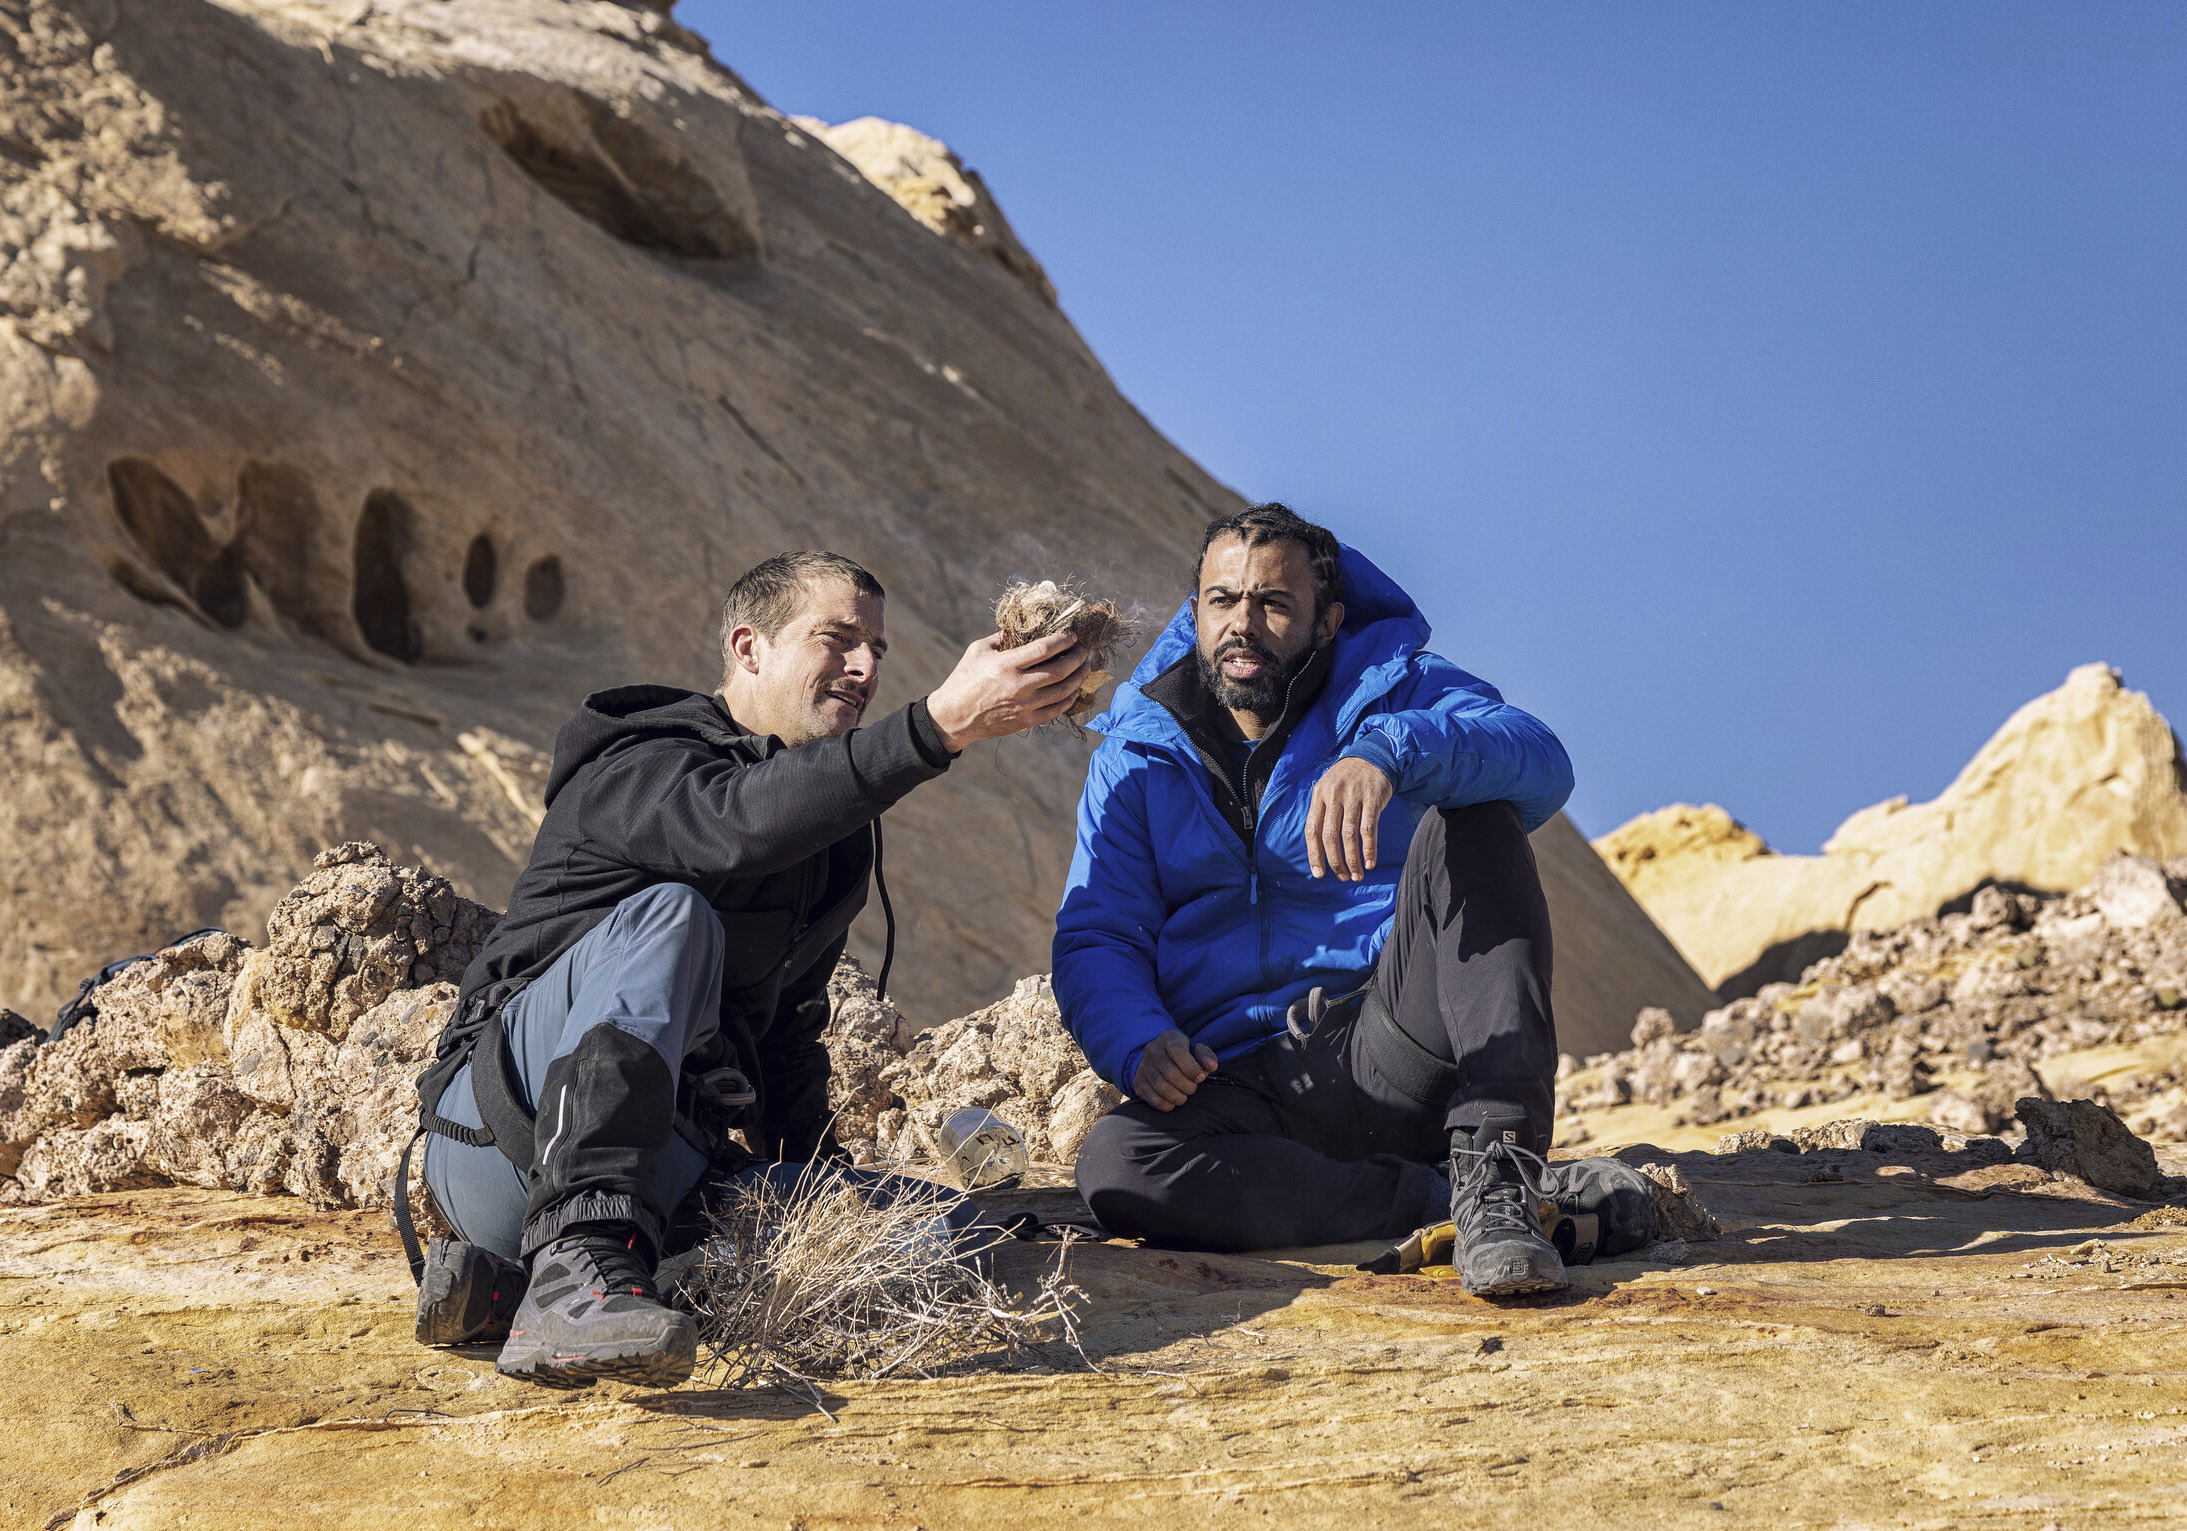 Daveed Diggs, who eats a tarantula, and Cynthia Erivo join Bear Grylls to survive in the wild